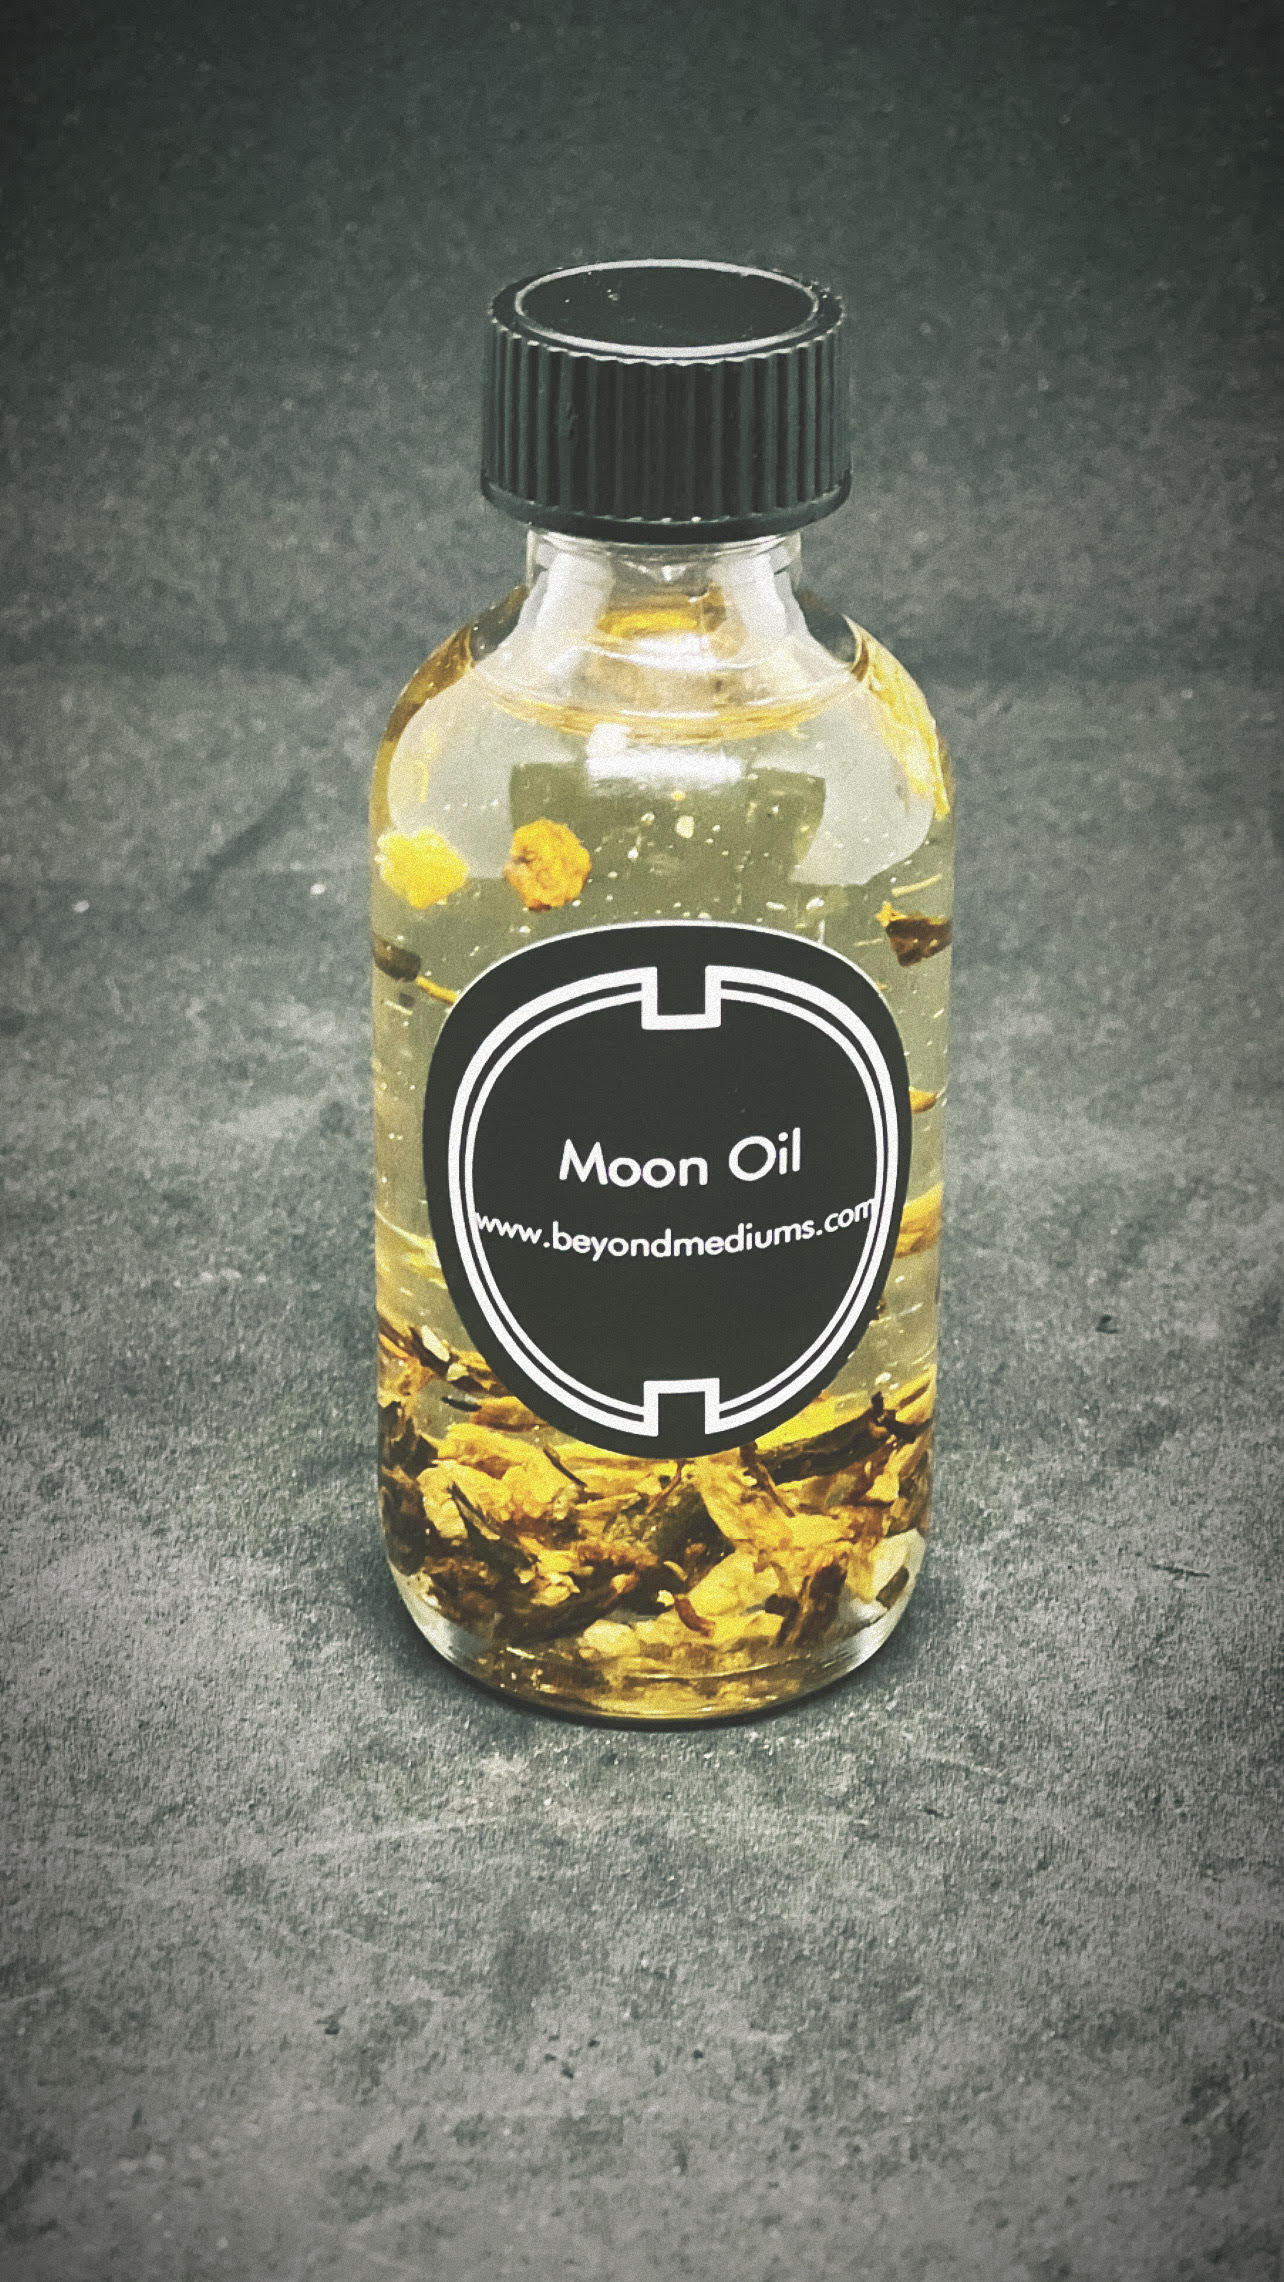 Image of Moon Oil